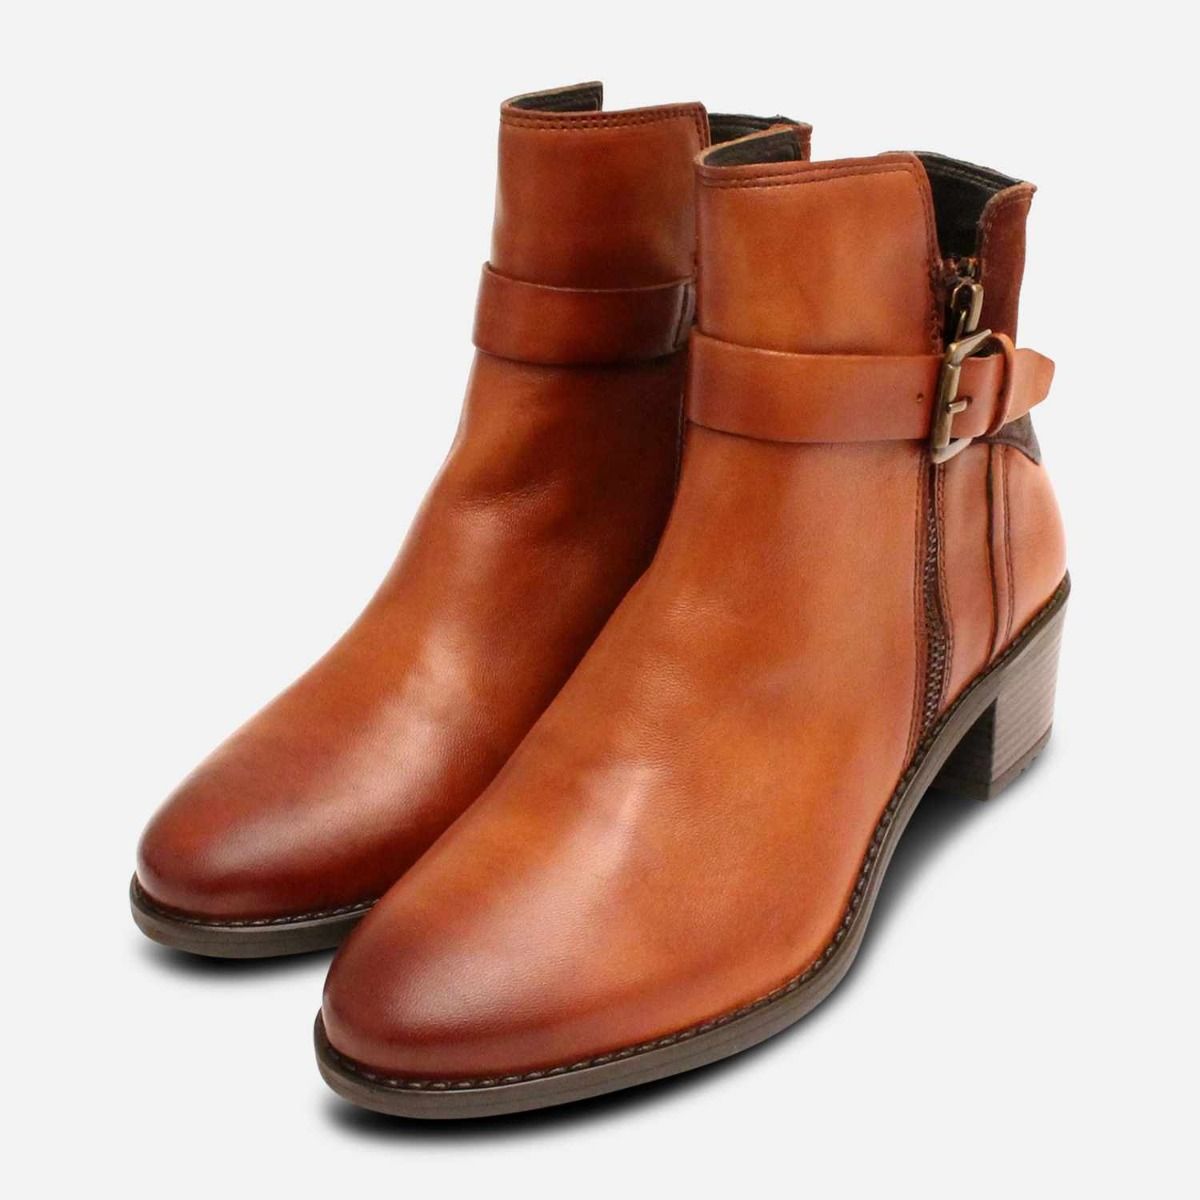 Bugatti Womens Heeled Ankle Zip Boots in Light Brown